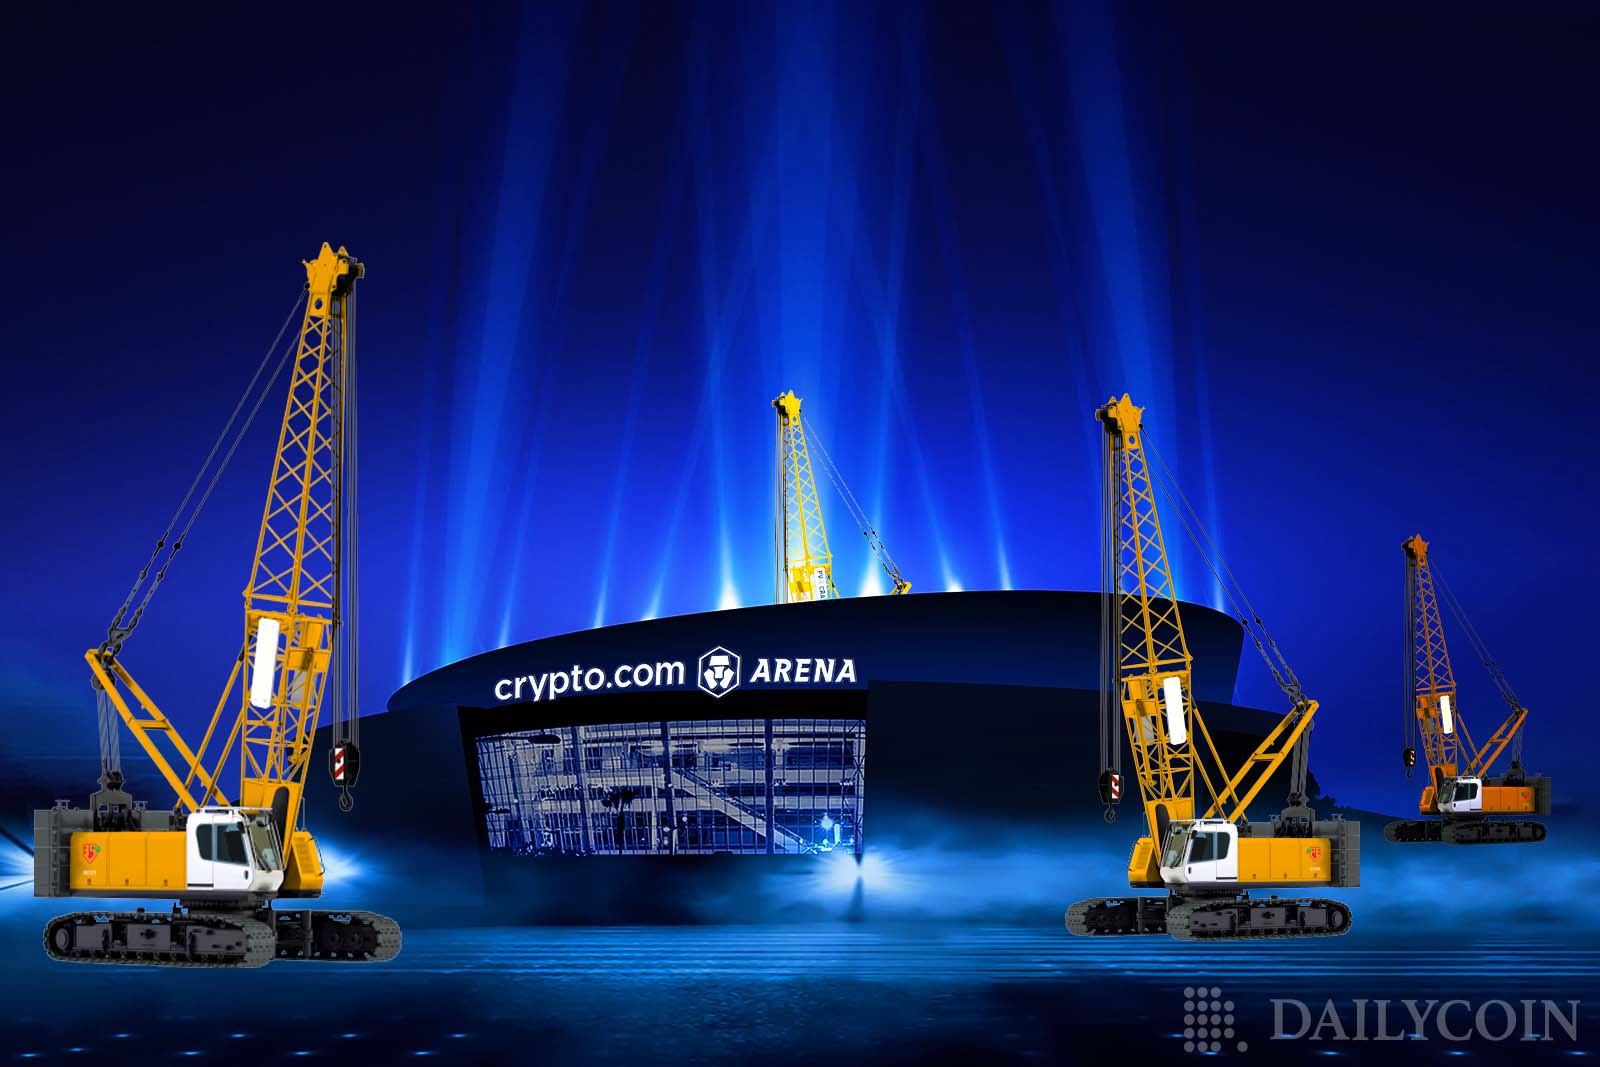 Crypto.com Announces Multimillion-Dollar Investment to Remodel its Los Angeles Arena